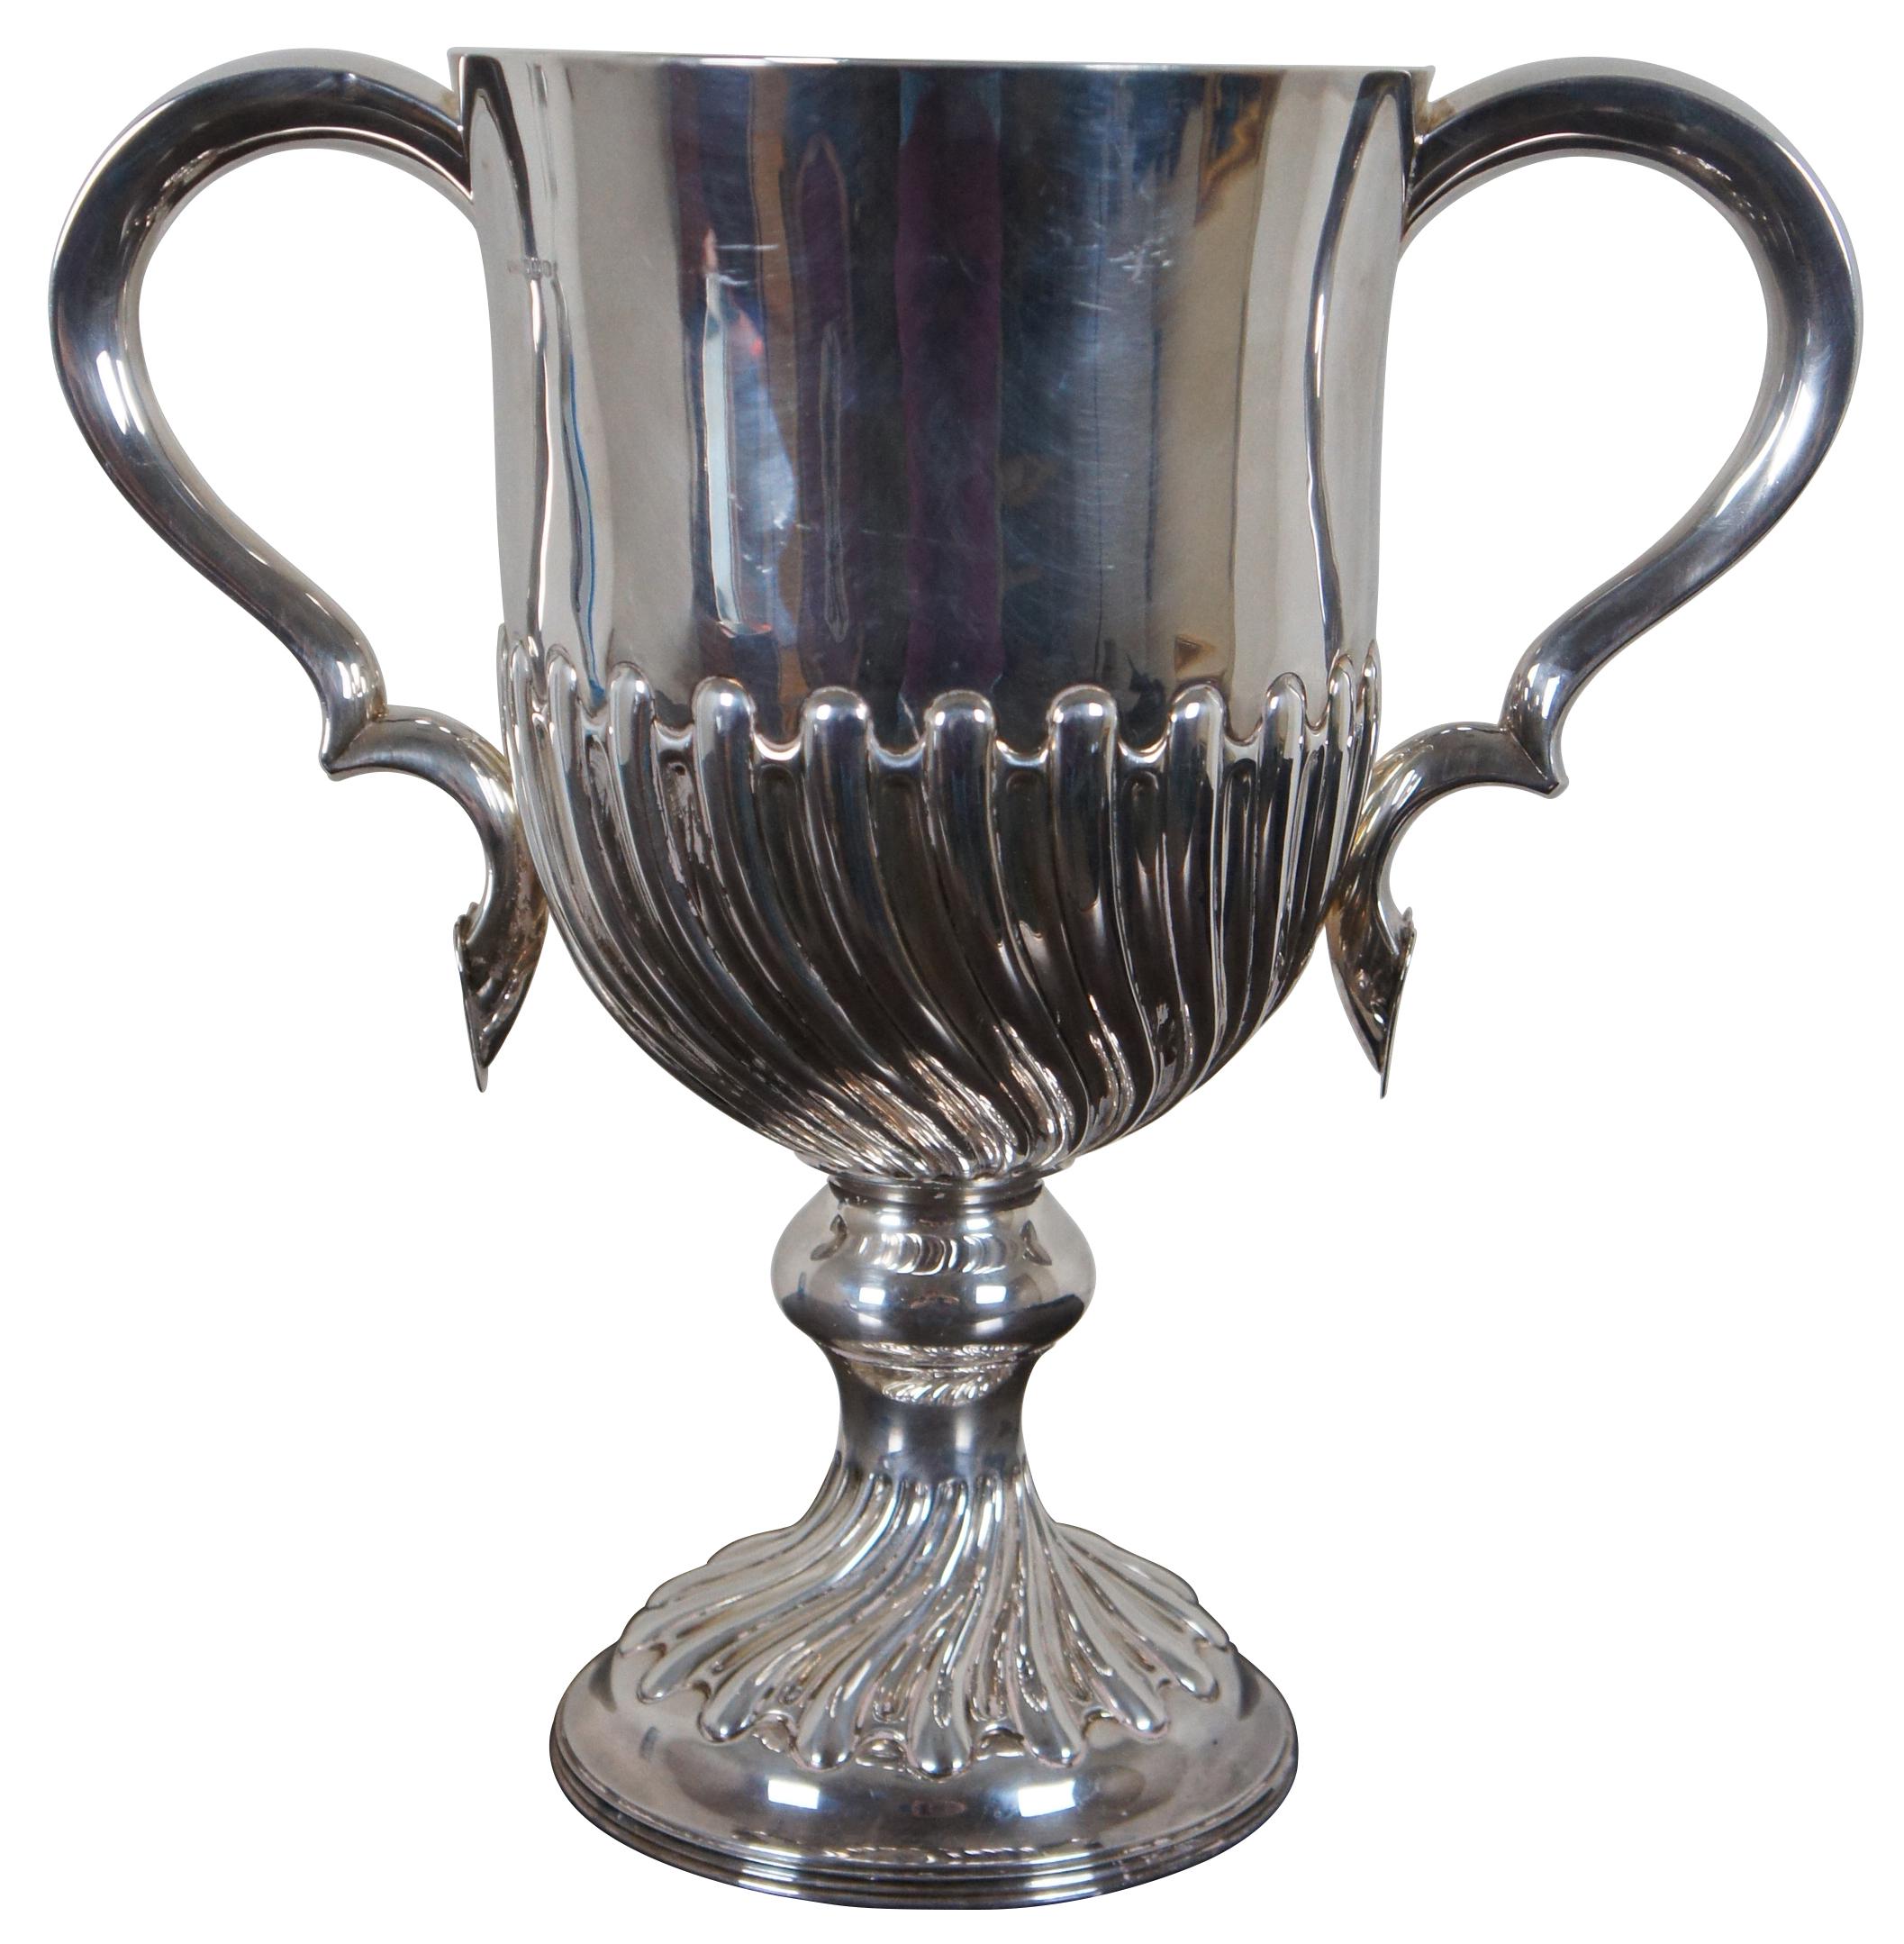 Large antique trophy shaped silver ice / champagne bucket, vase or trophy presentation cup by Harry Atkin.  Beautifully chased with gadrooning design along base and lower side of cup.  Features thick contoured handles leading to a heart pendant.